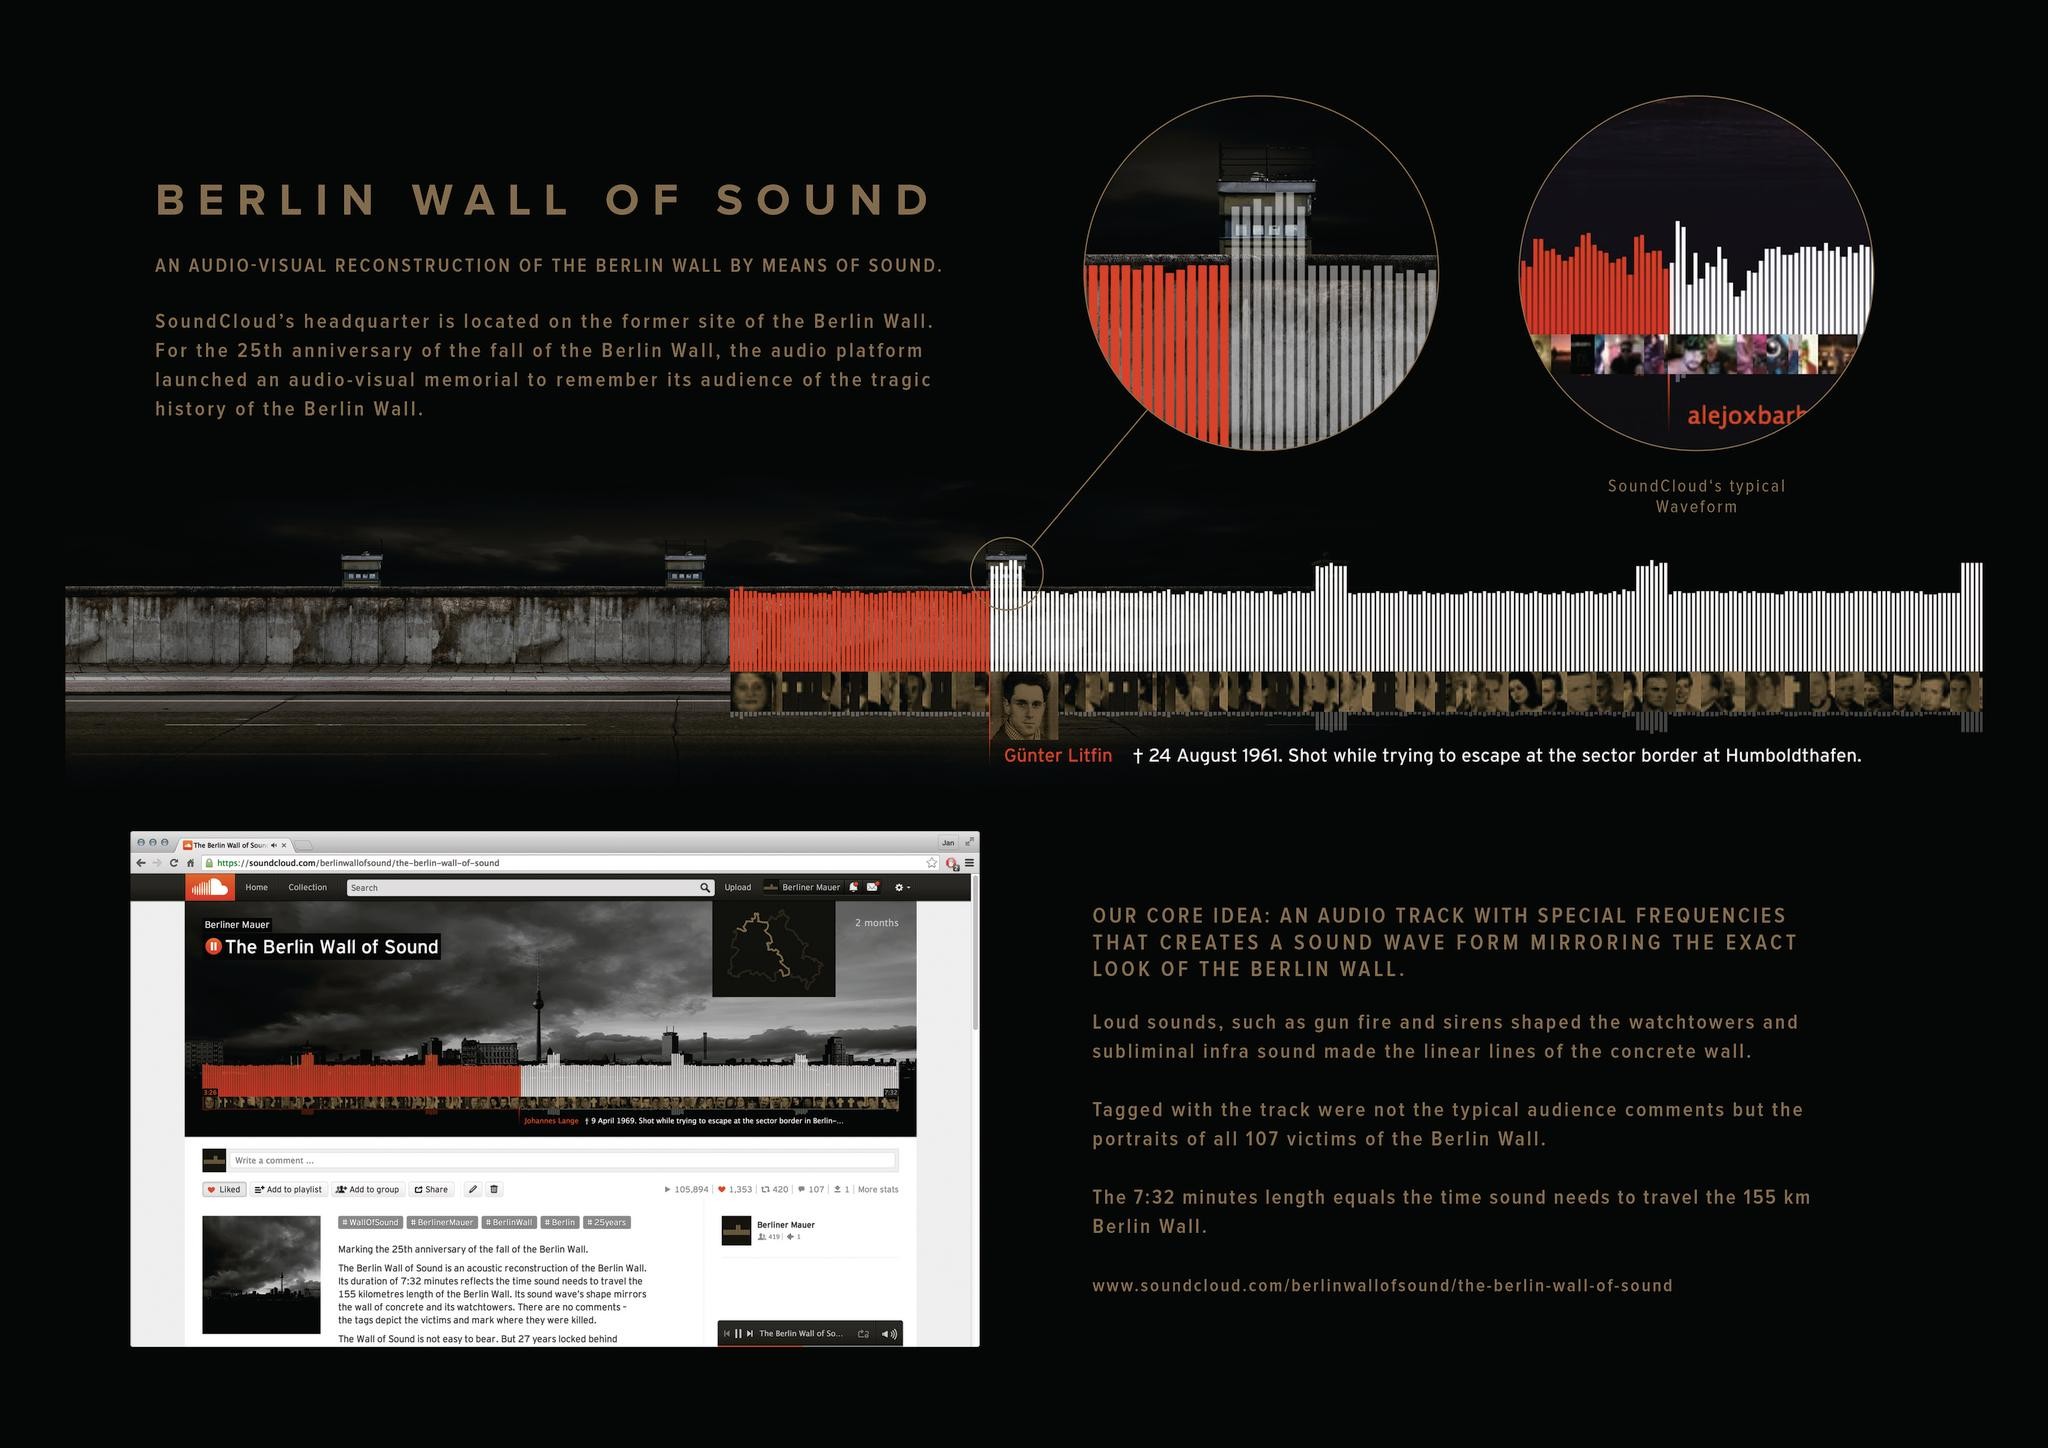 THE BERLIN WALL OF SOUND